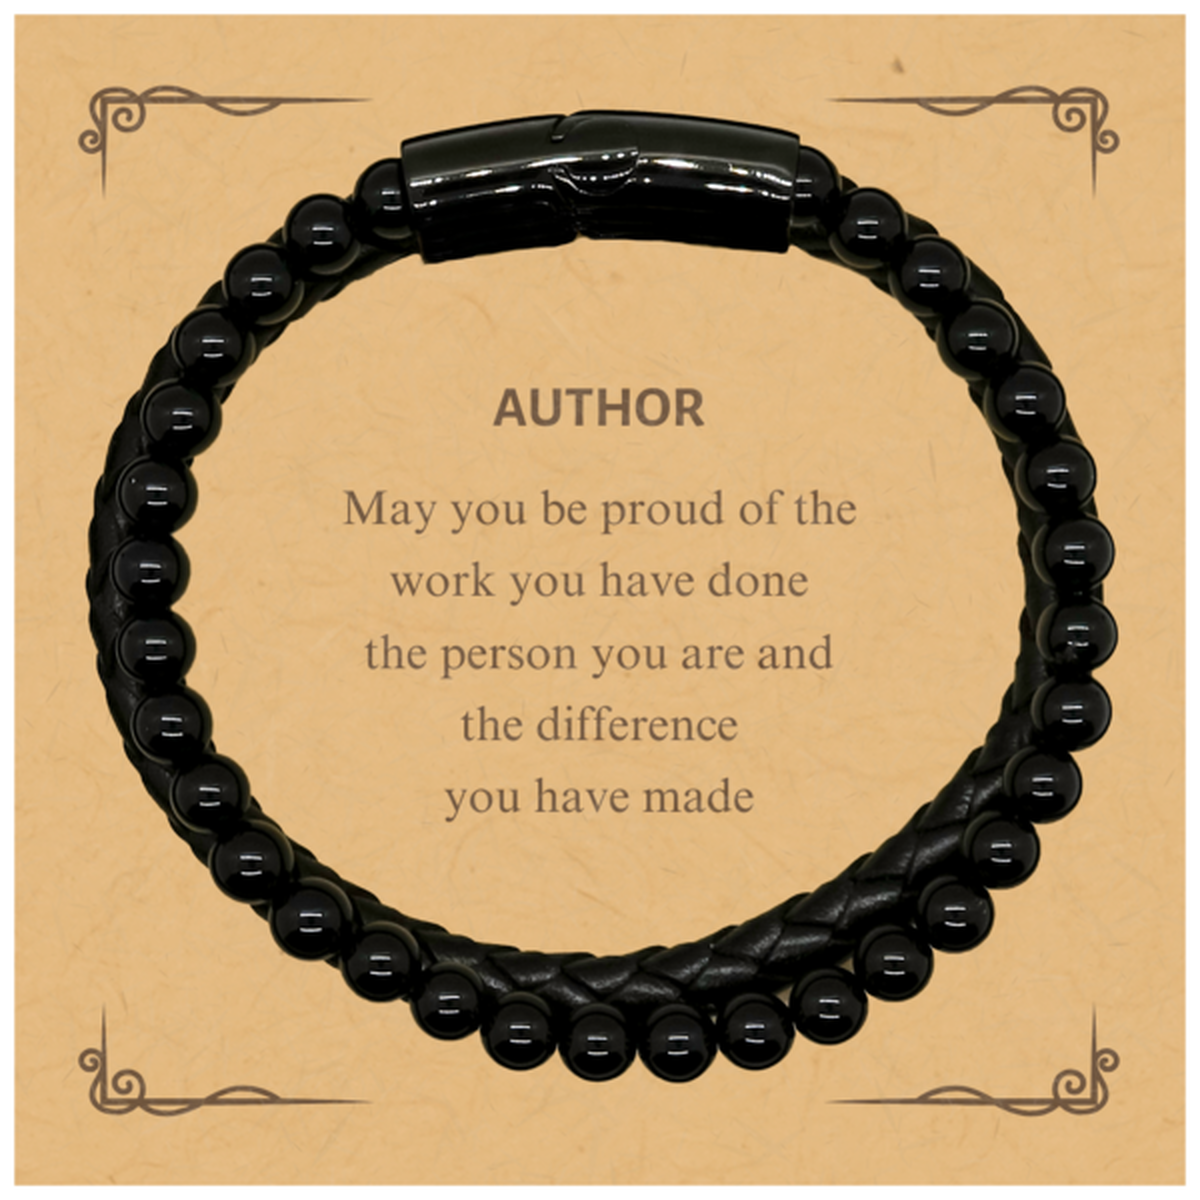 Author May you be proud of the work you have done, Retirement Author Stone Leather Bracelets for Colleague Appreciation Gifts Amazing for Author